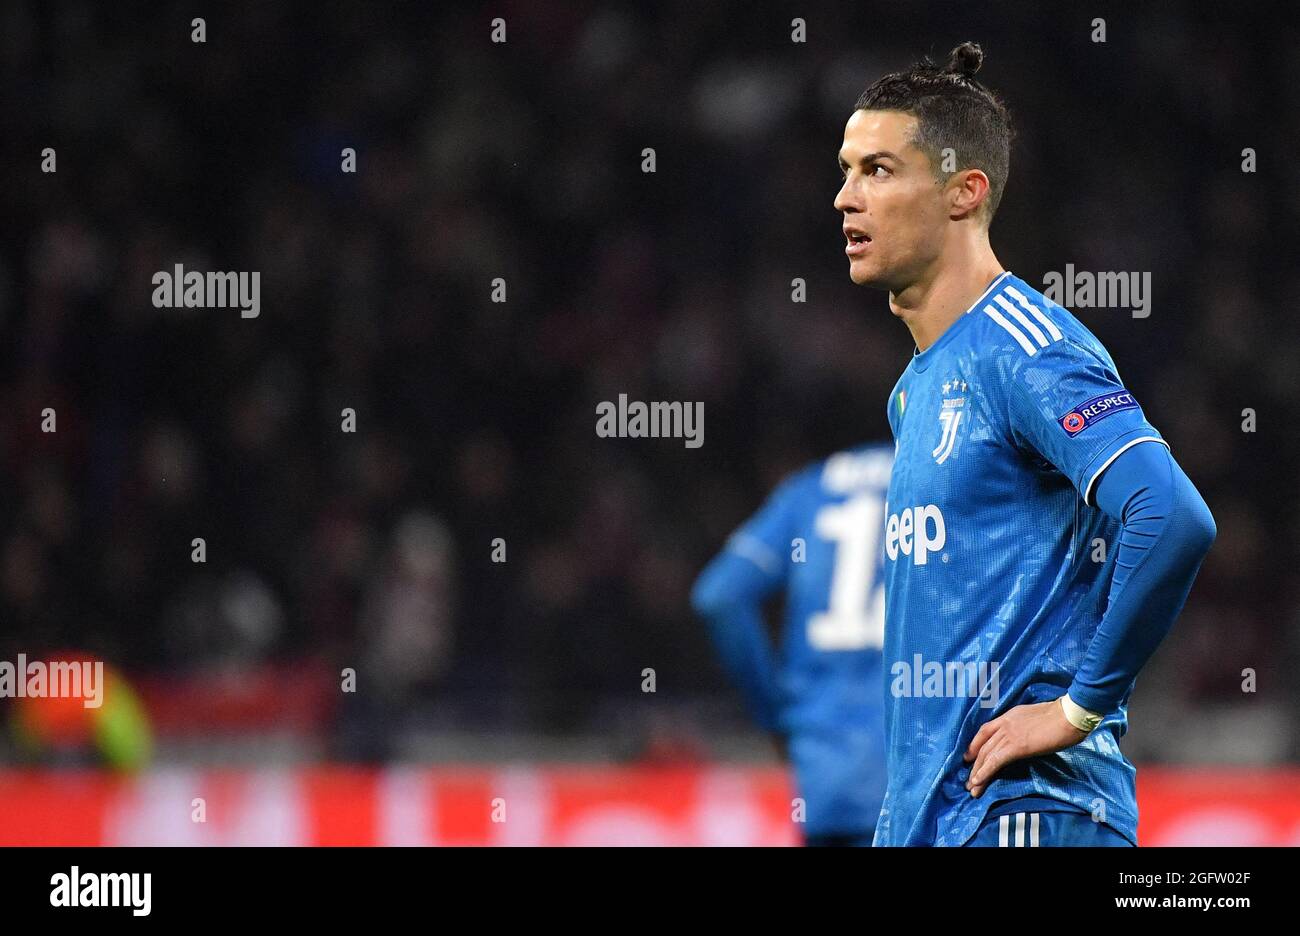 File photo dated February 26, 2020 of Juventus' Cristiano Ronaldo during  the UEFA Champions League round of 16 first leg Olympique Lyonnais (OL) v  Juventus Turin football match at the Parc Olympique